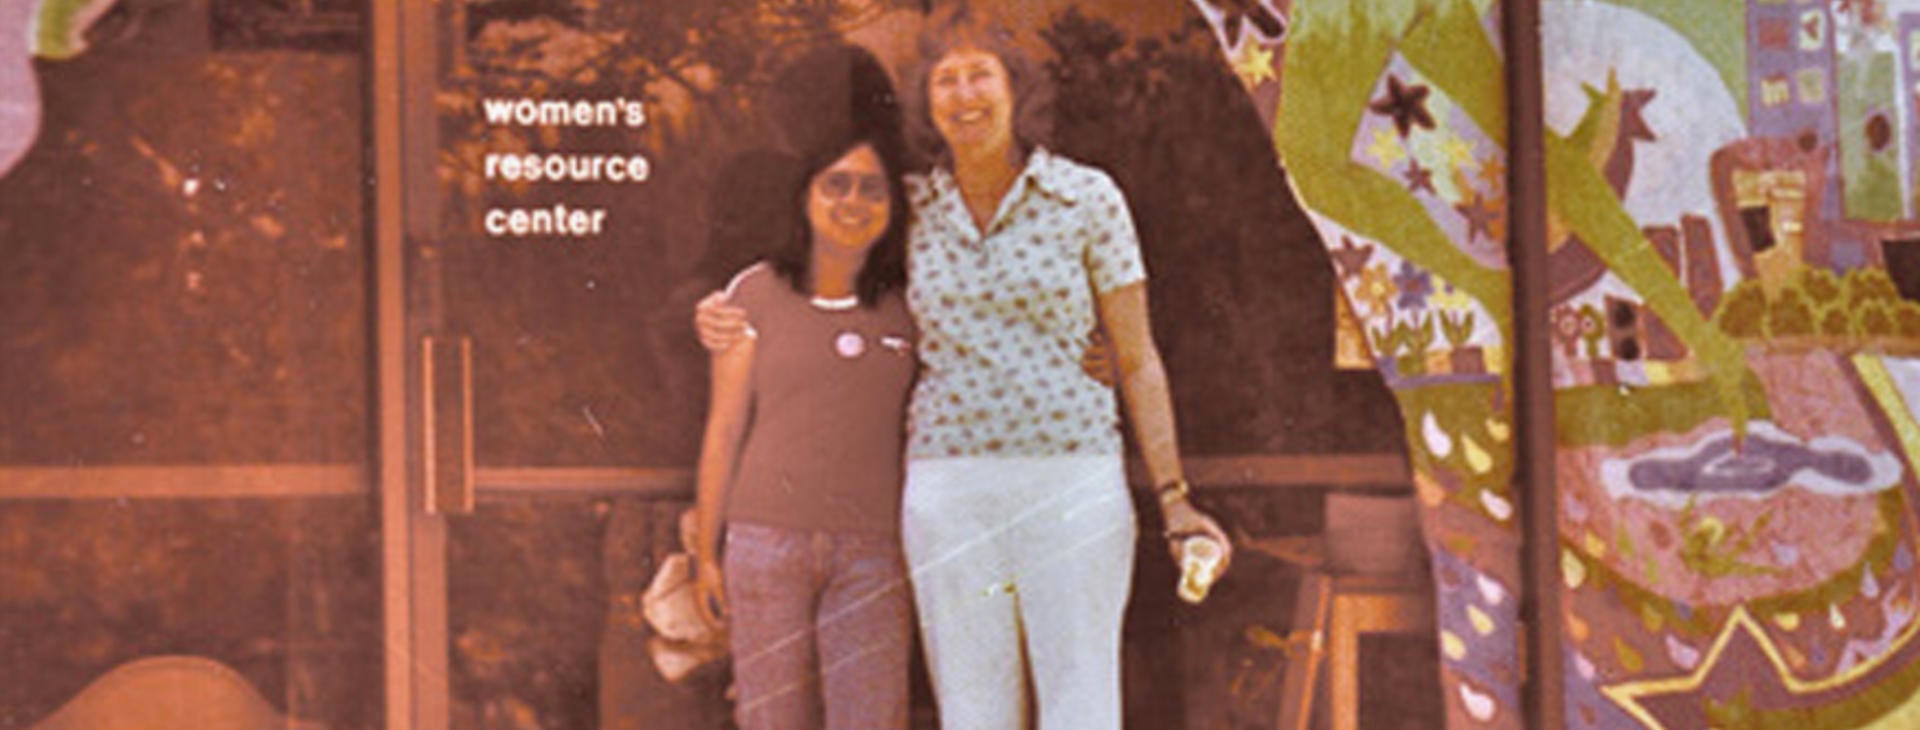 Two women standing side-by-side in front of the women's resource center in the 1970s.